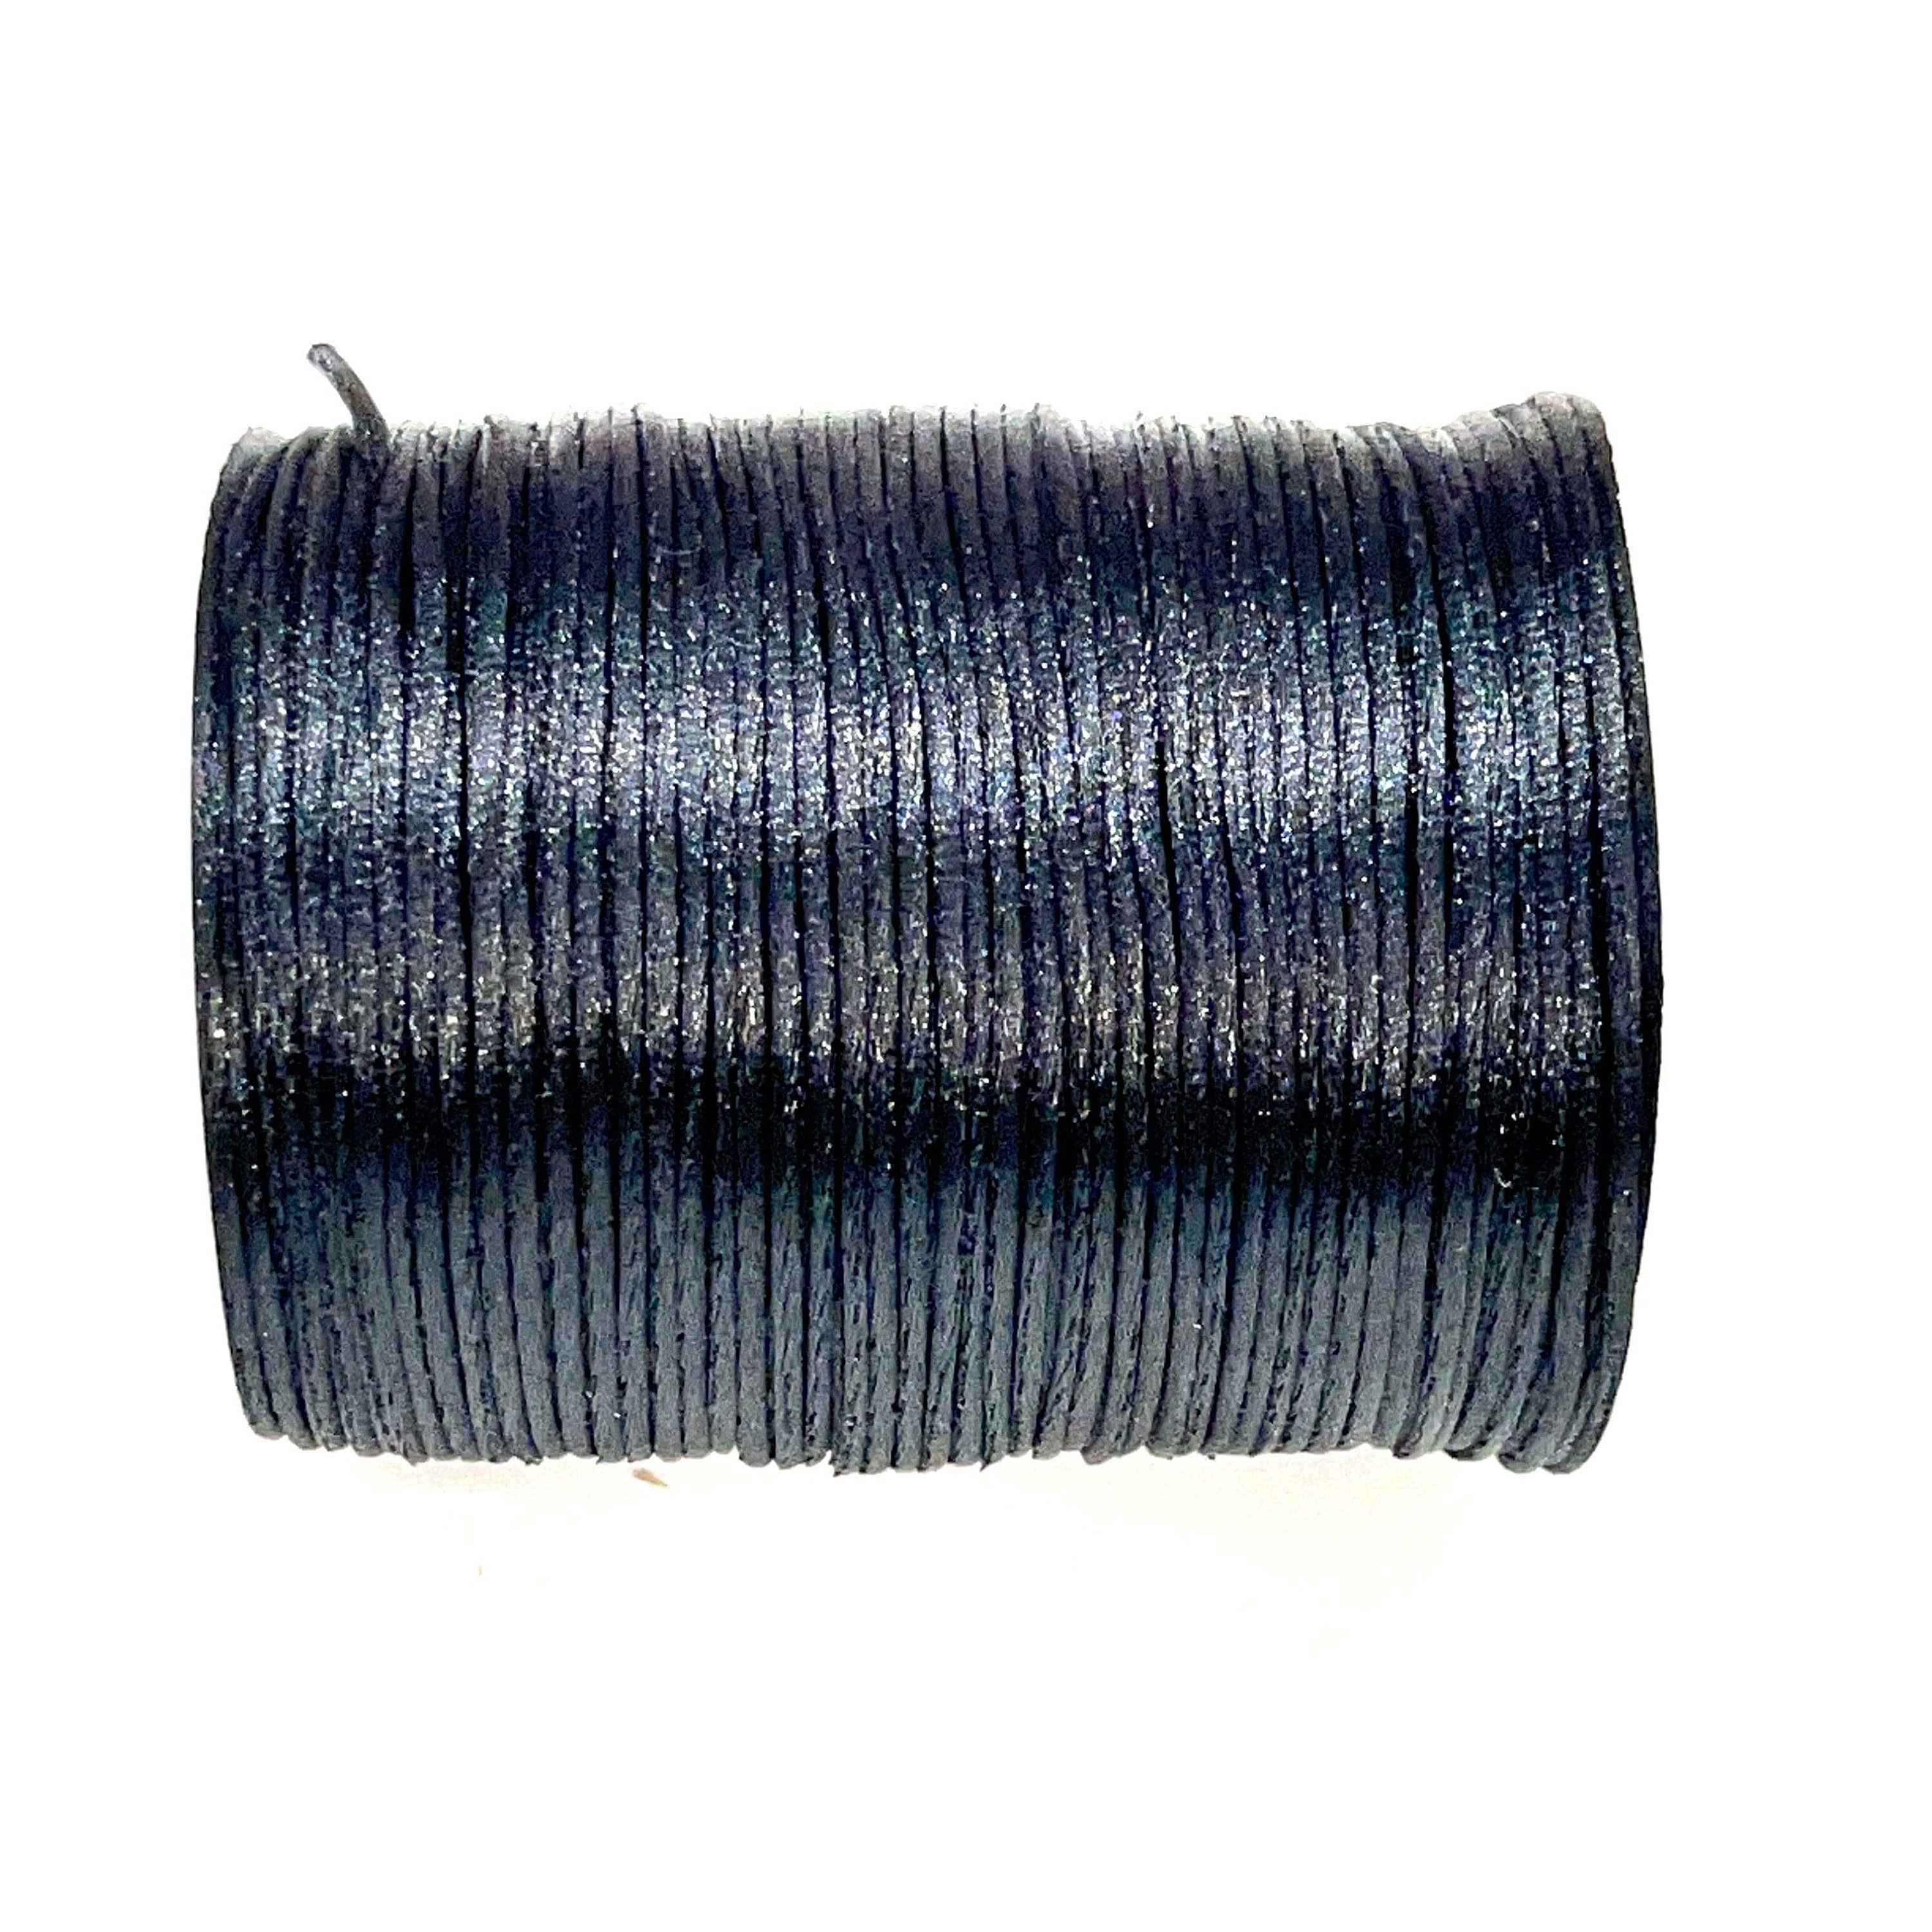  OLYCRAFT 55 Yards 2mm Twisted Satin Nylon Cord 3-Ply Blue  Twisted Cord Trim String Thread for Crafts and Jewelry Making : Everything  Else